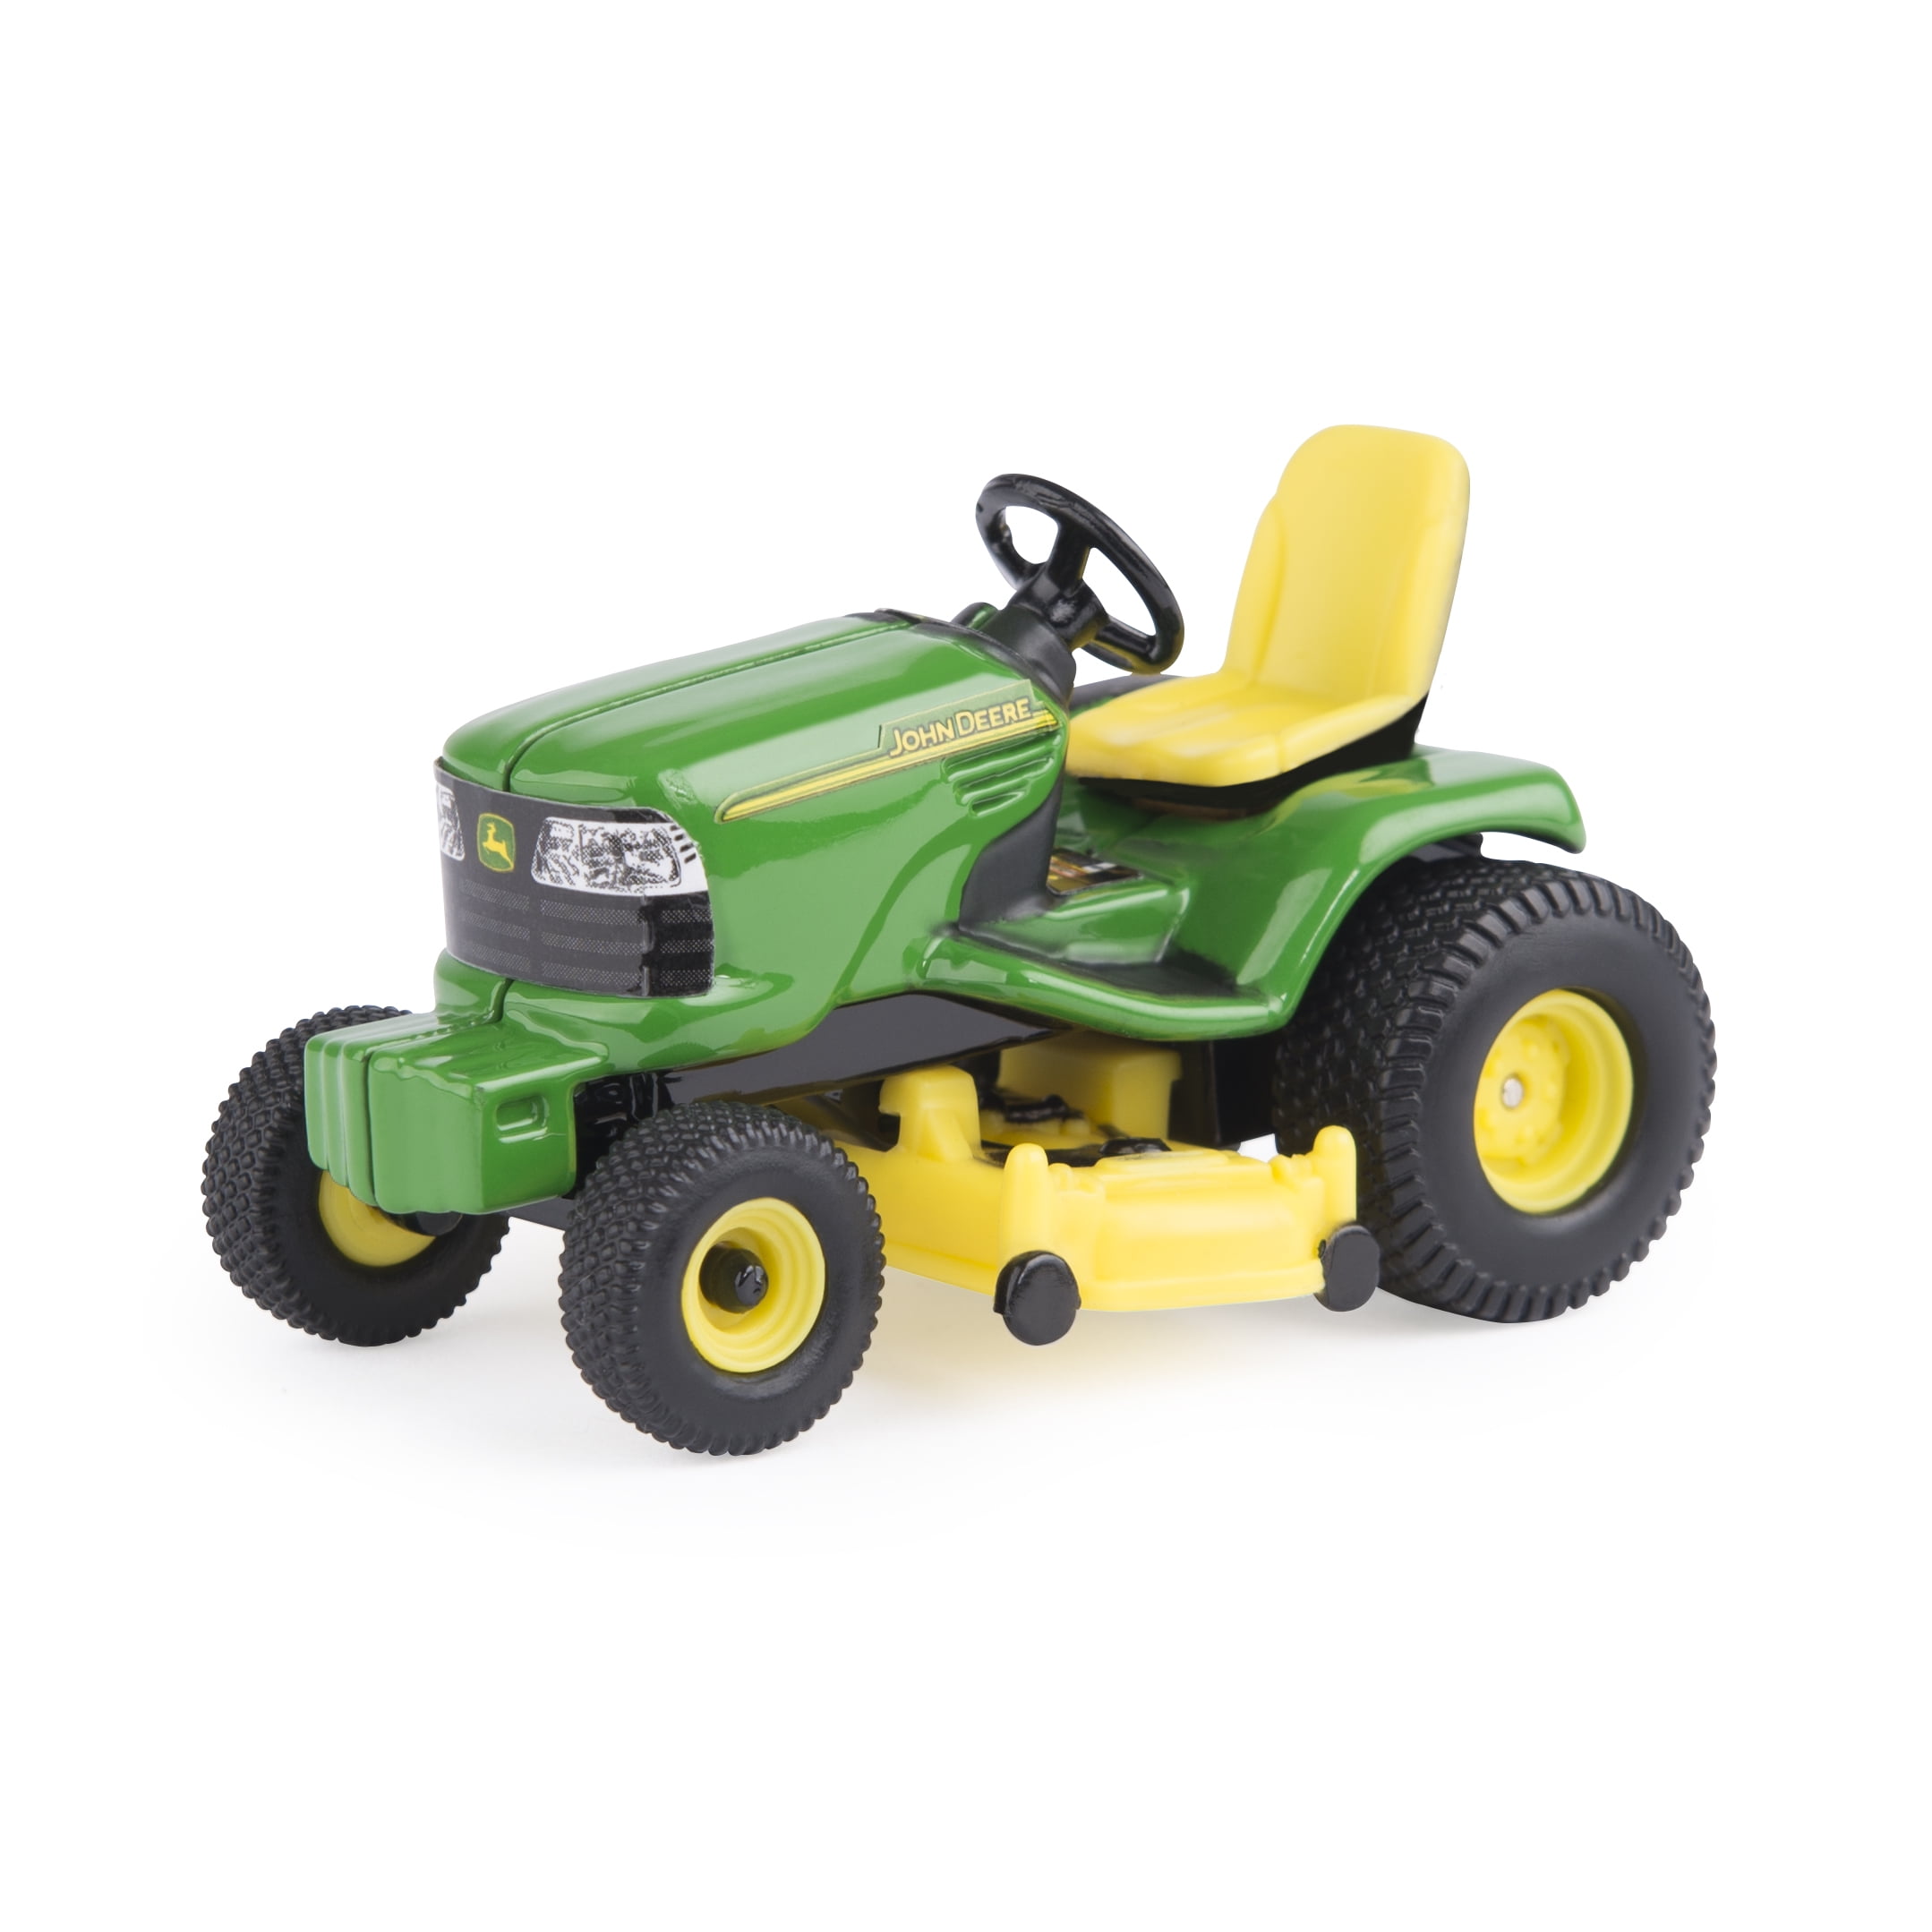 John Deere Very Cool With Lawn Mower Deck Riding Tractor ERTL Quality 